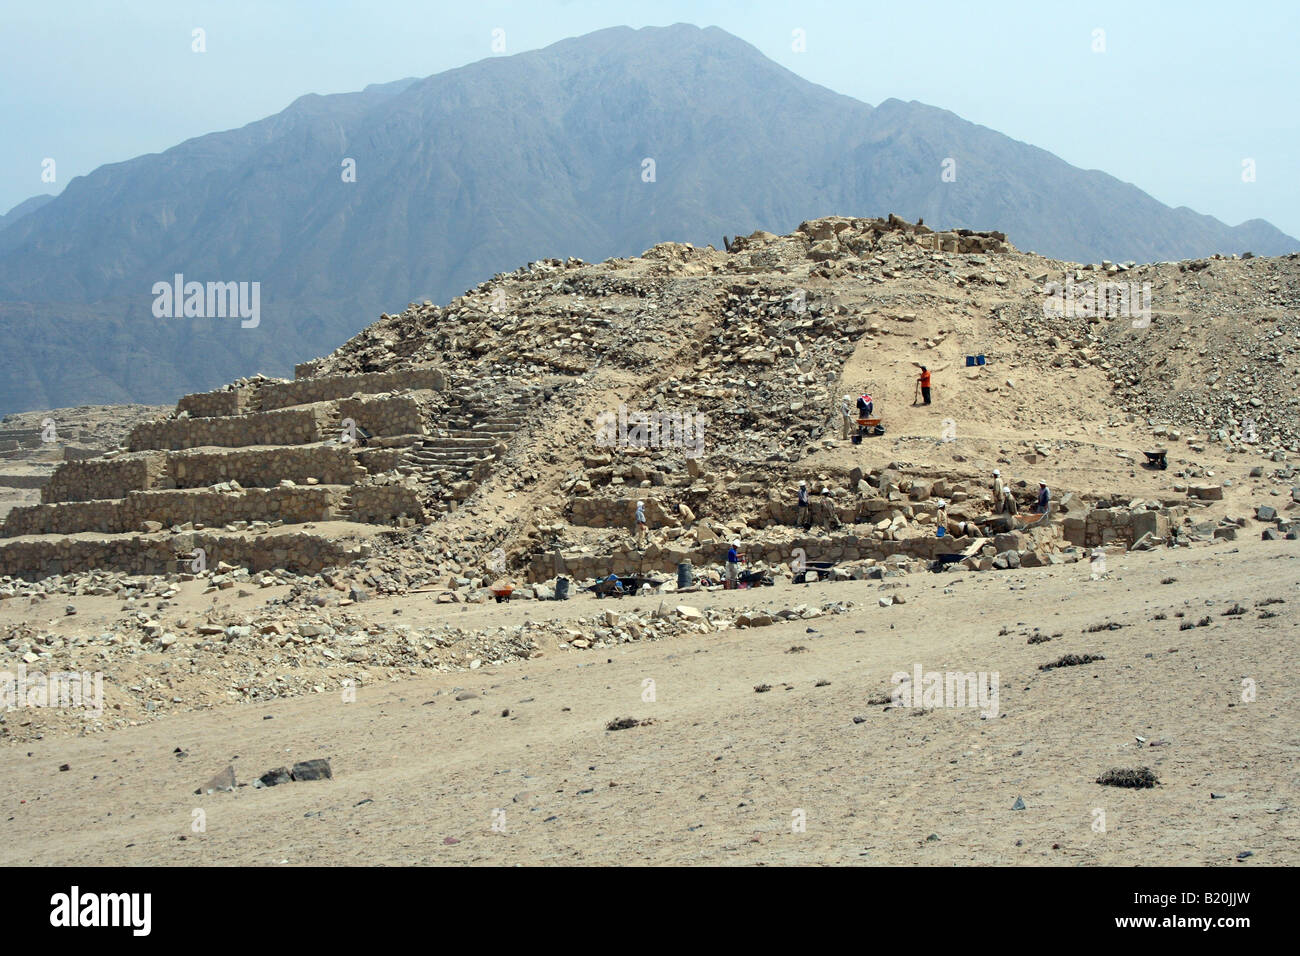 The Quarry Pyramid at the Caral archeological site near Barranca, Peru north of Lima. One of the oldest cities in the Americas. Stock Photo